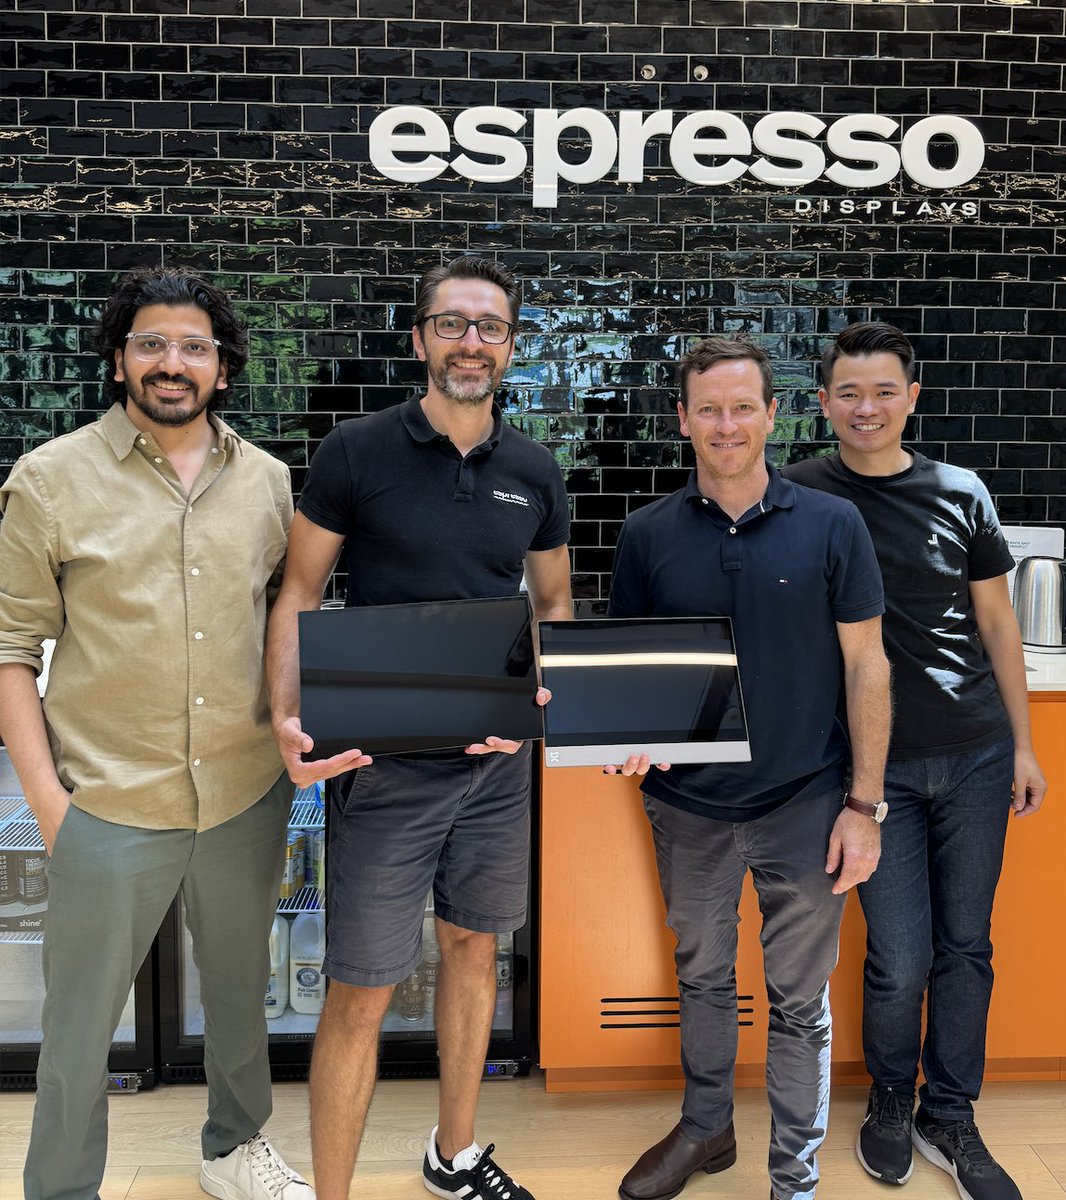 It was great to have @anguskeene @CalvinYu950142 @S_Rishabh at espressoHQ discussing creative strategy on @X.  Looking forward to continuing our growth on X and growing the espresso brand. Thank you team.

cc: @WillScuderi @ScottMcKeon_ @dom2404 @nickhealy